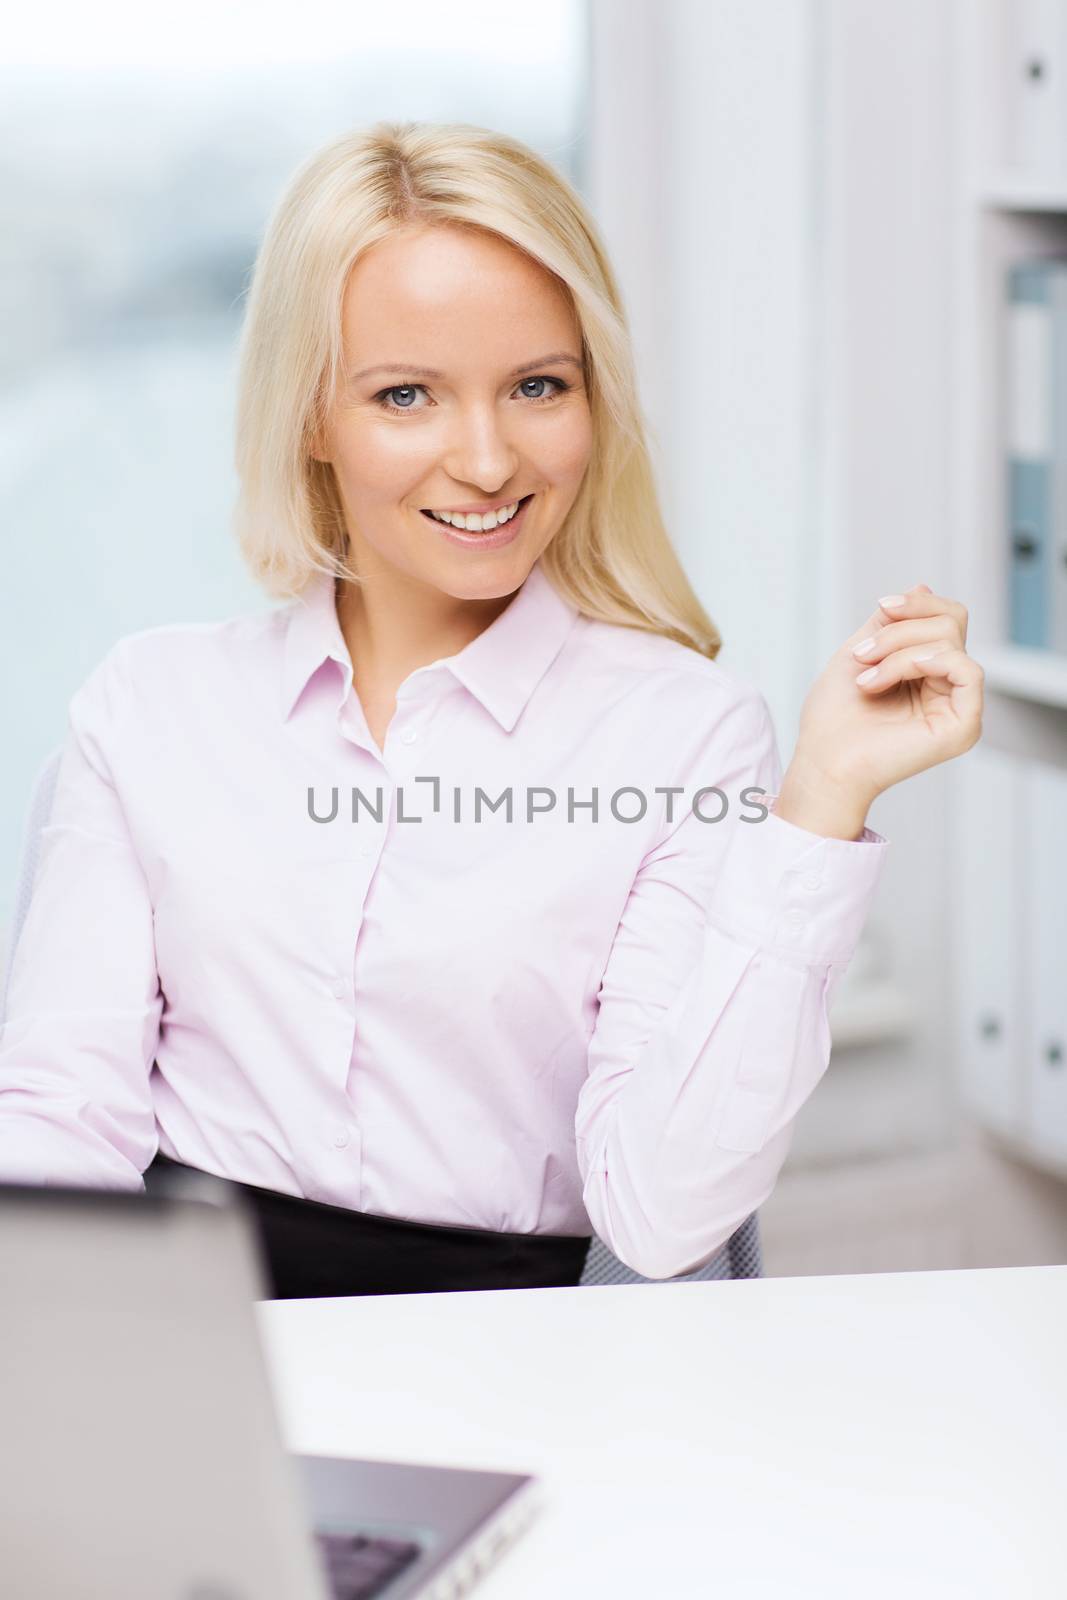 education, business and technology concept - smiling businesswoman or student with laptop computer in office